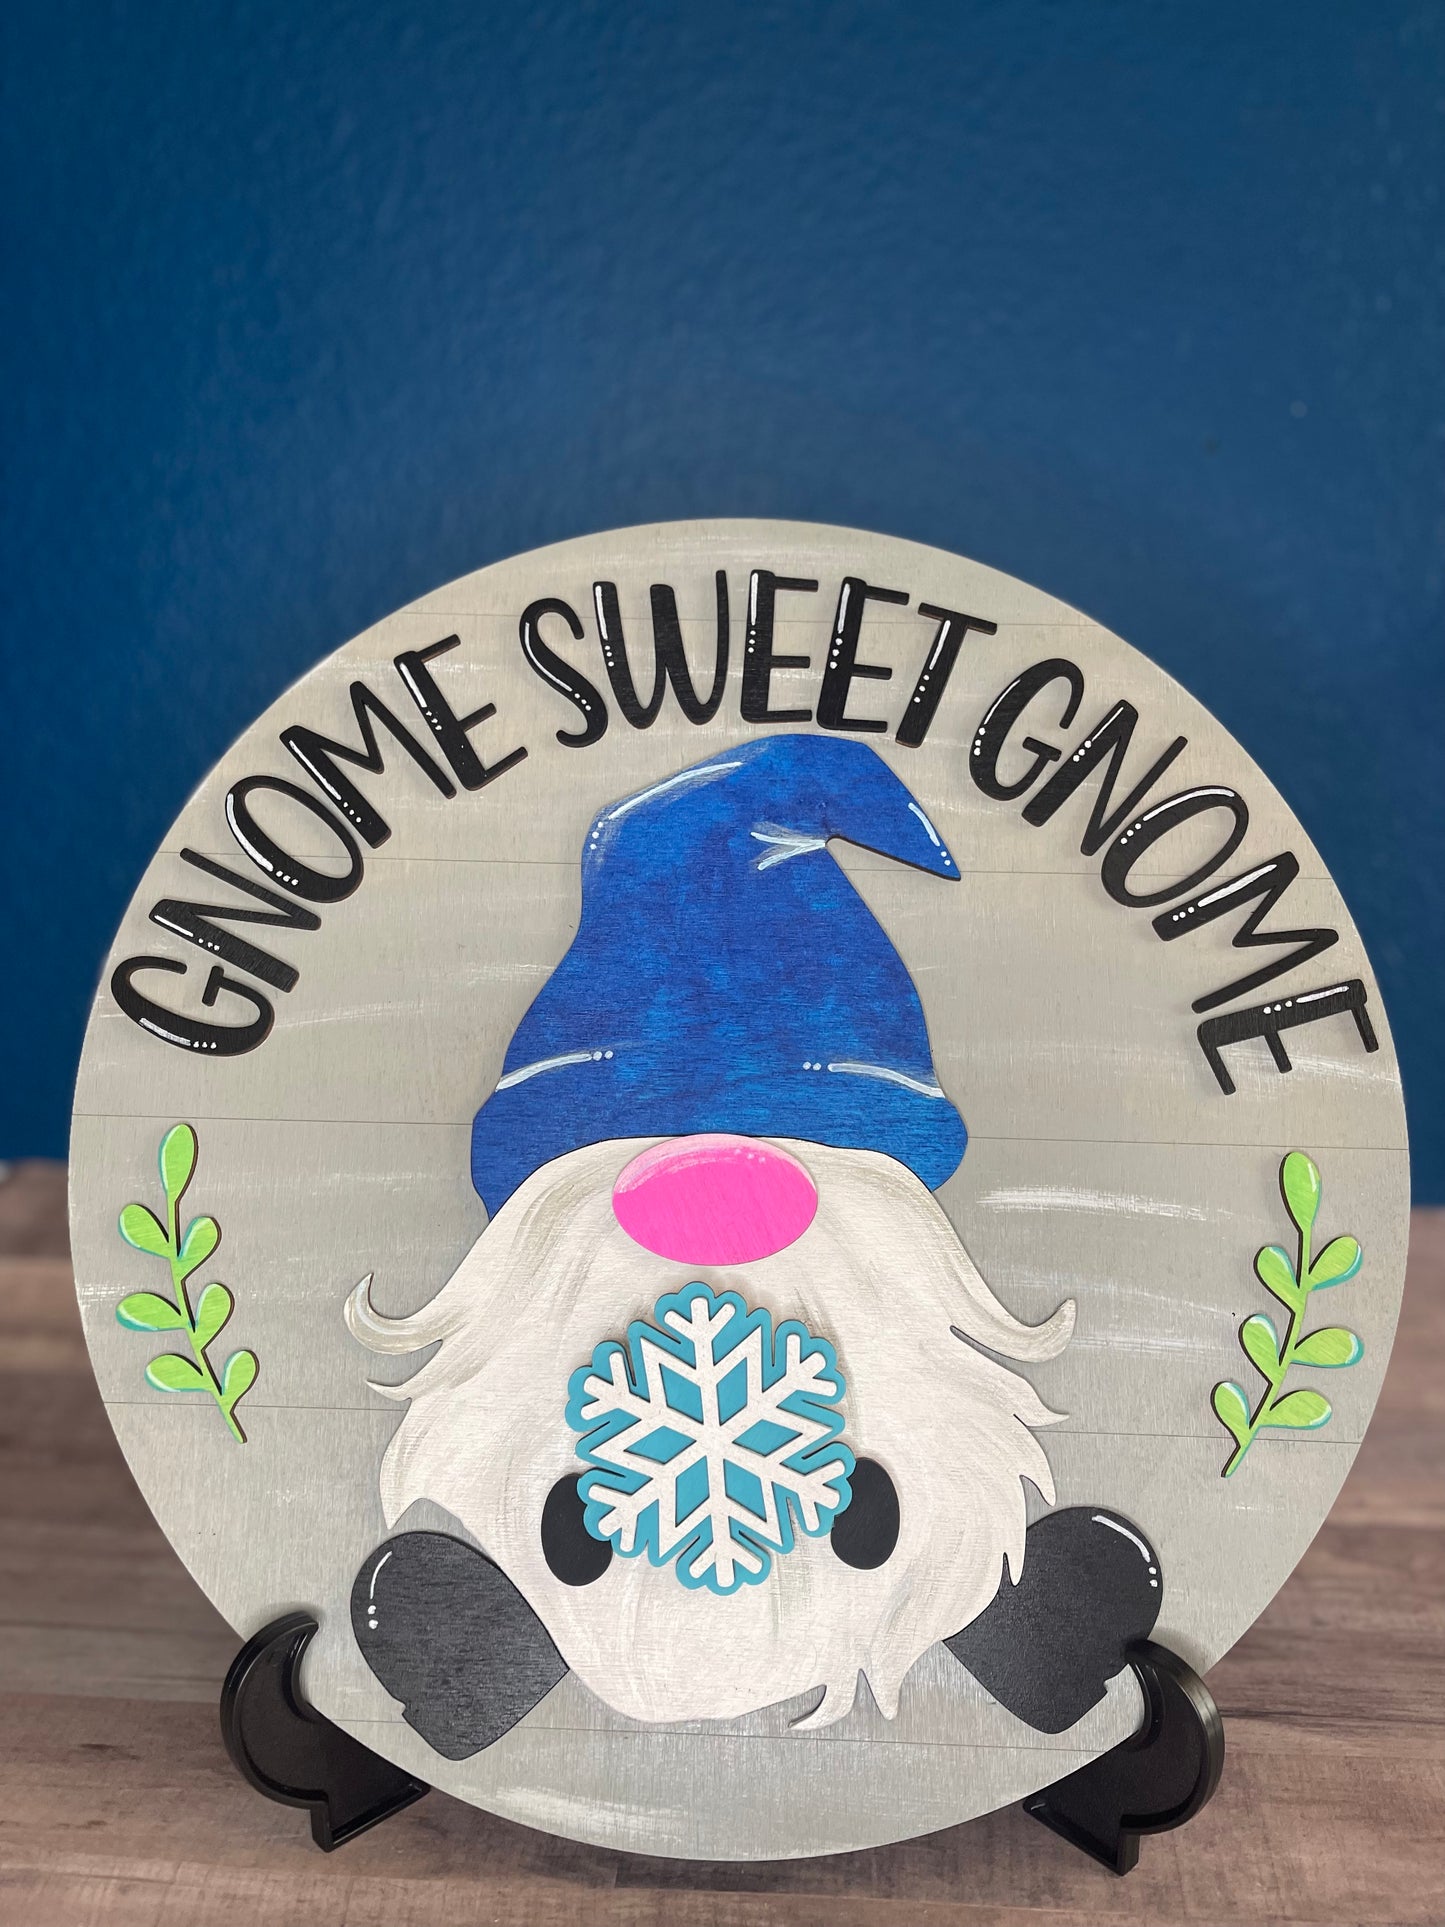 Gnome Sweet Gnome interchangeable sign